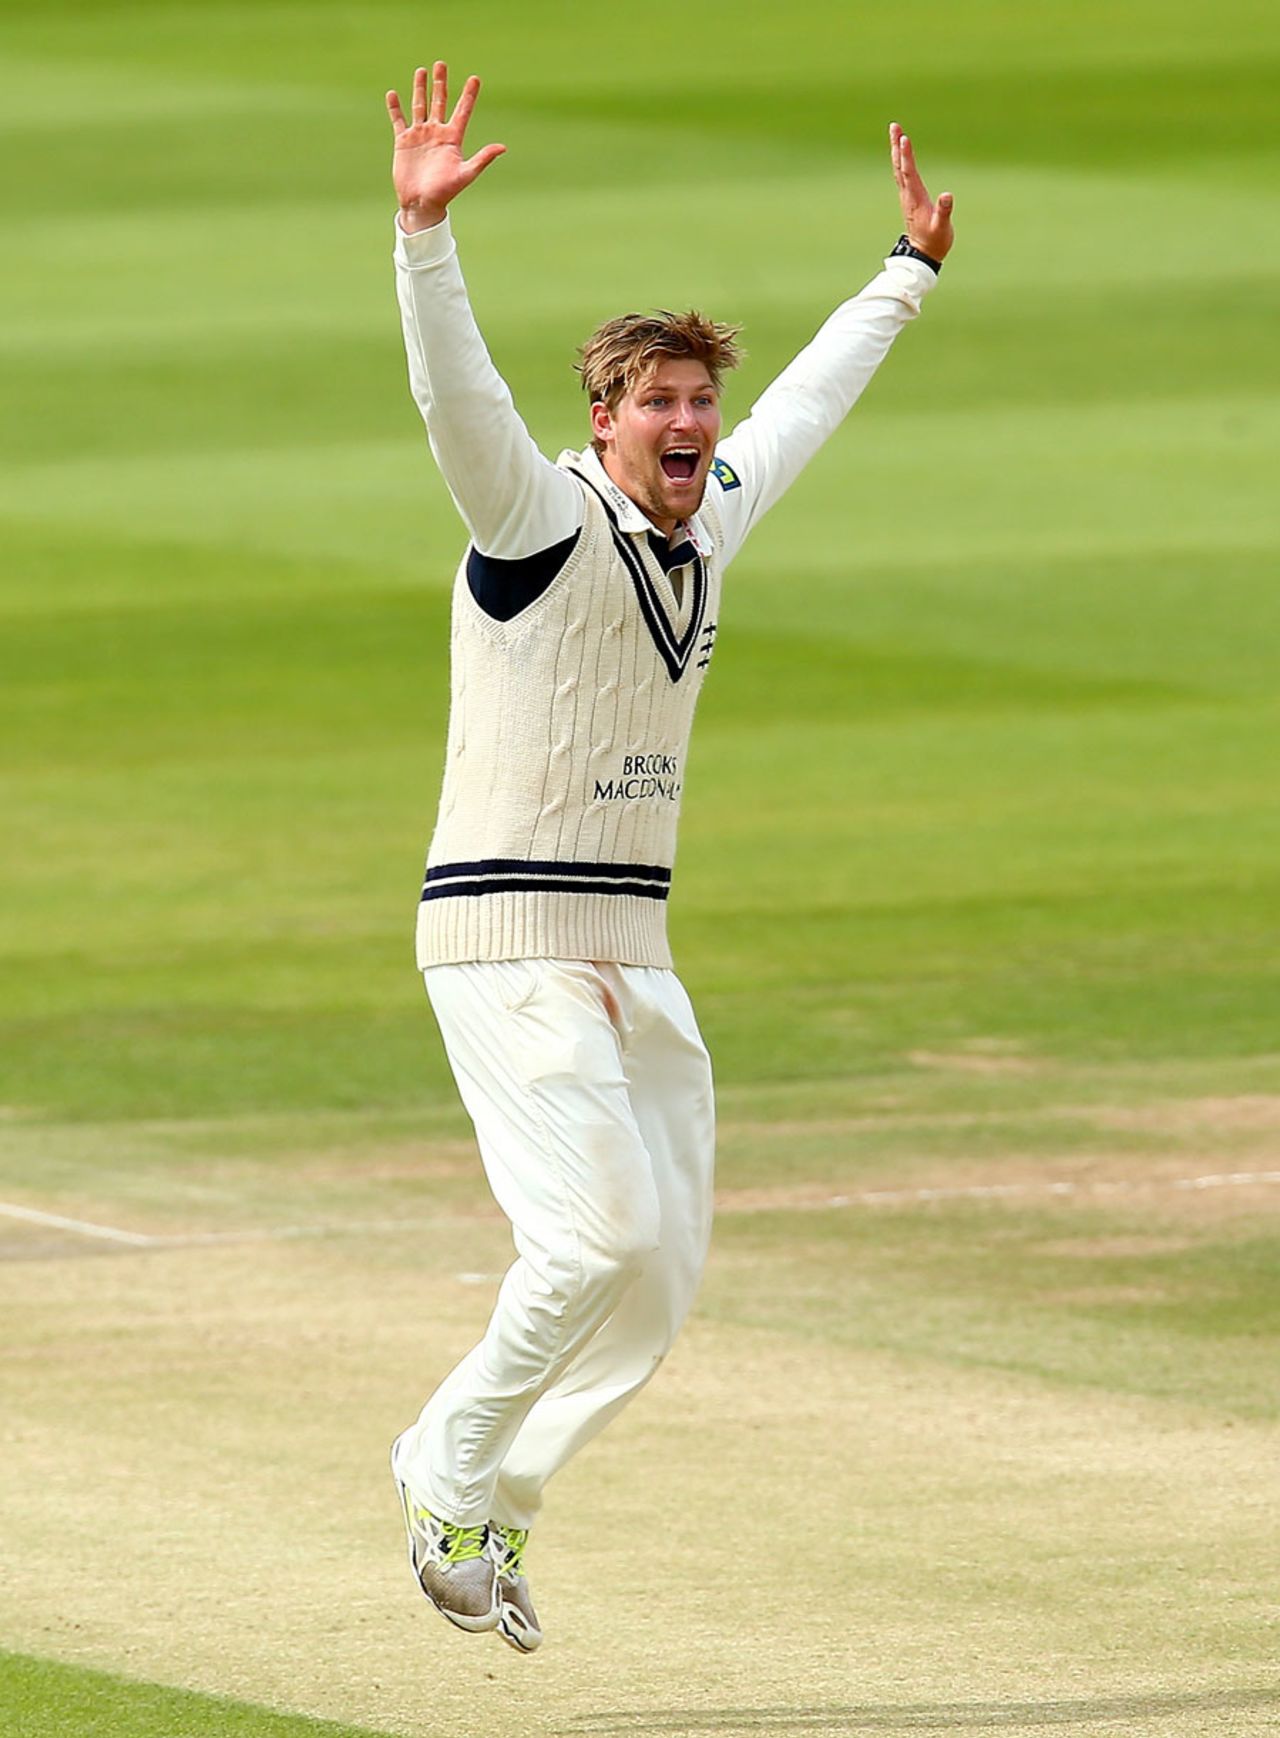 Ollie Rayner appeal successfully for an lbw against Chris Rushworth, Middlesex v Durham, County Championship Division One, Lord's, 3rd day, May 4, 2015